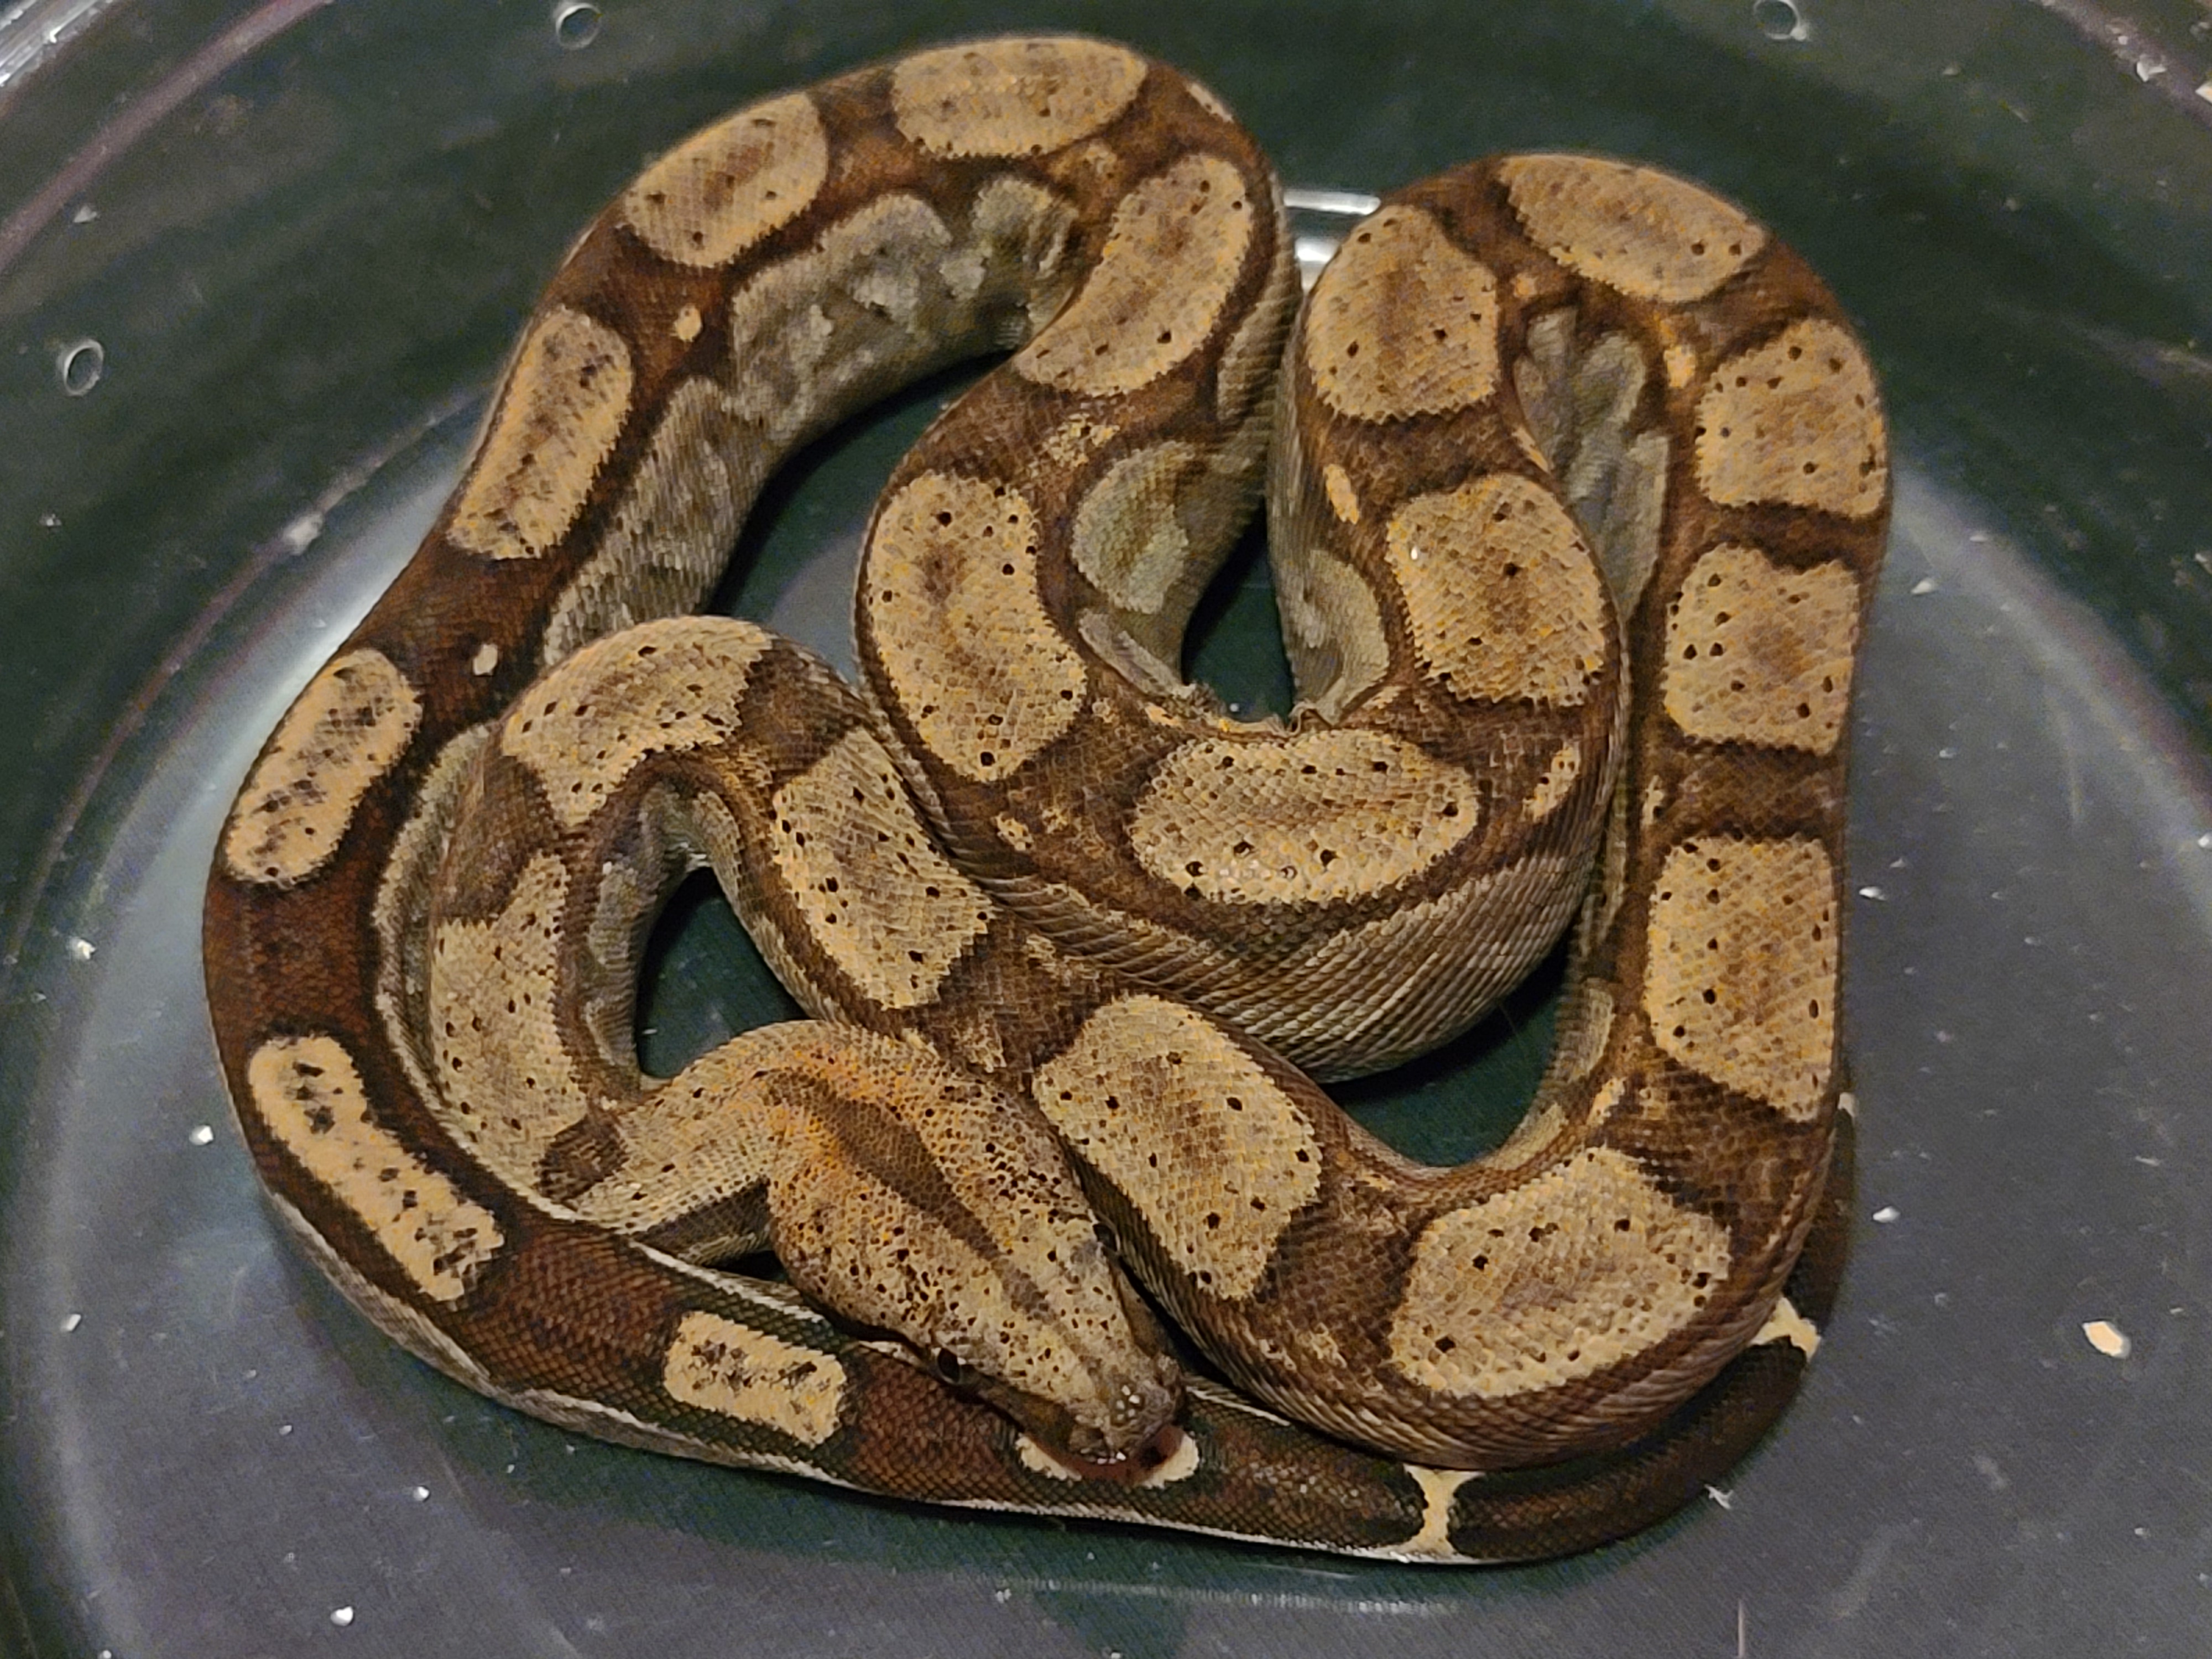 RLT Boa Constrictor by Extraordinary Ectotherms